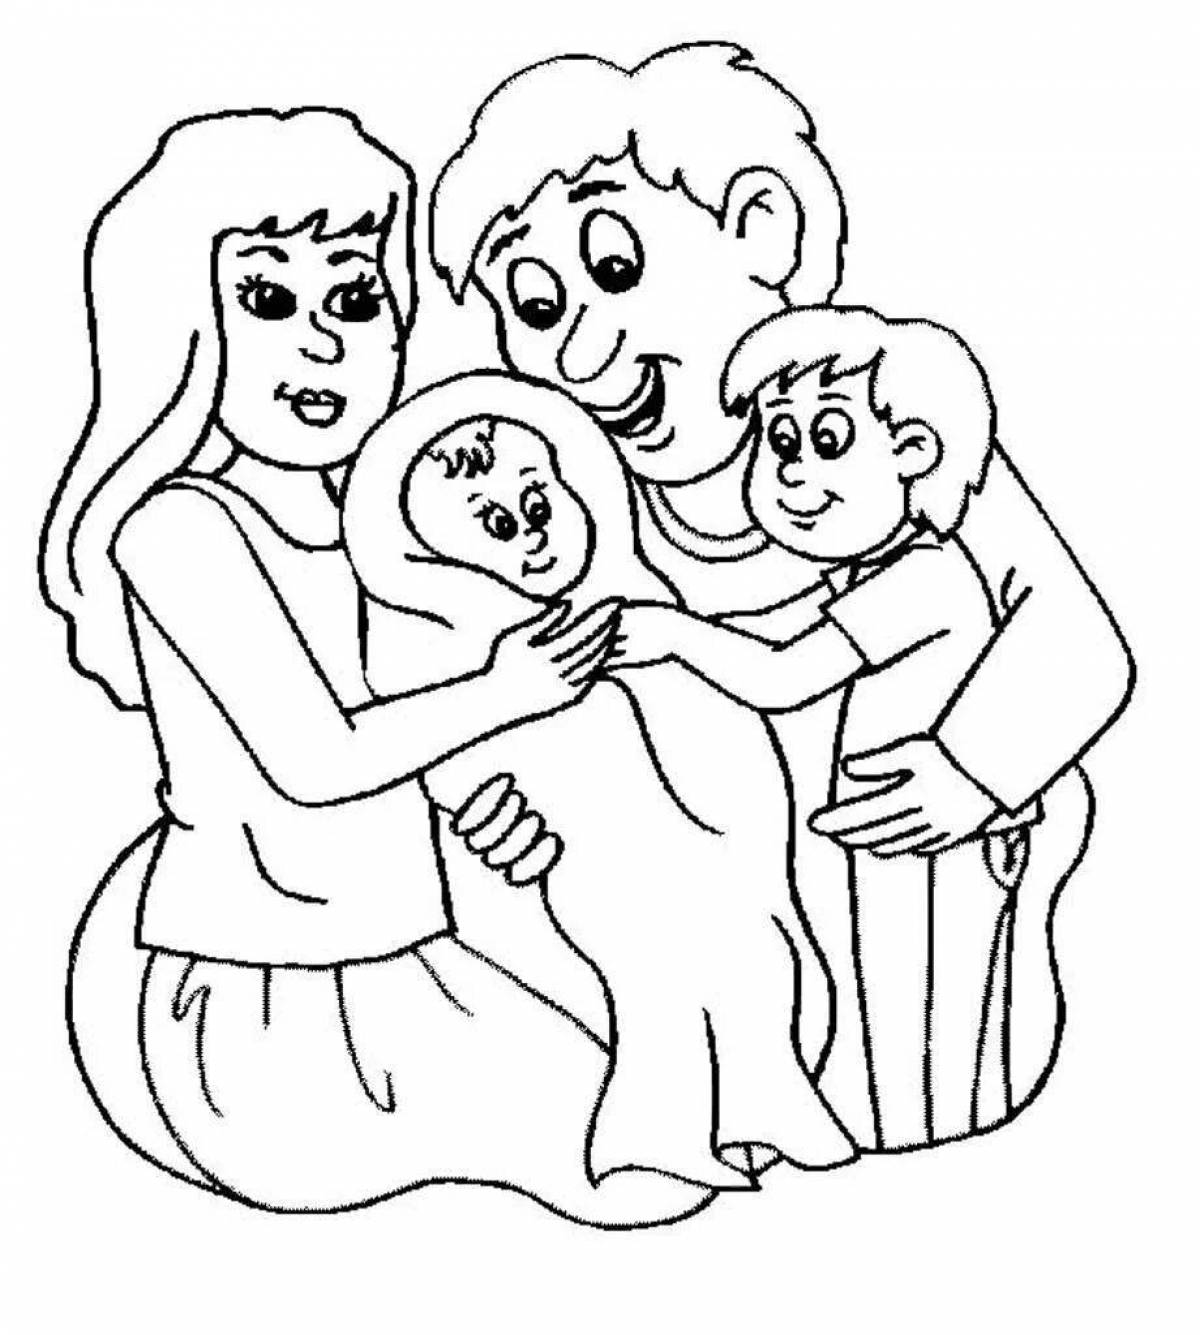 Adorable coloring book for parents